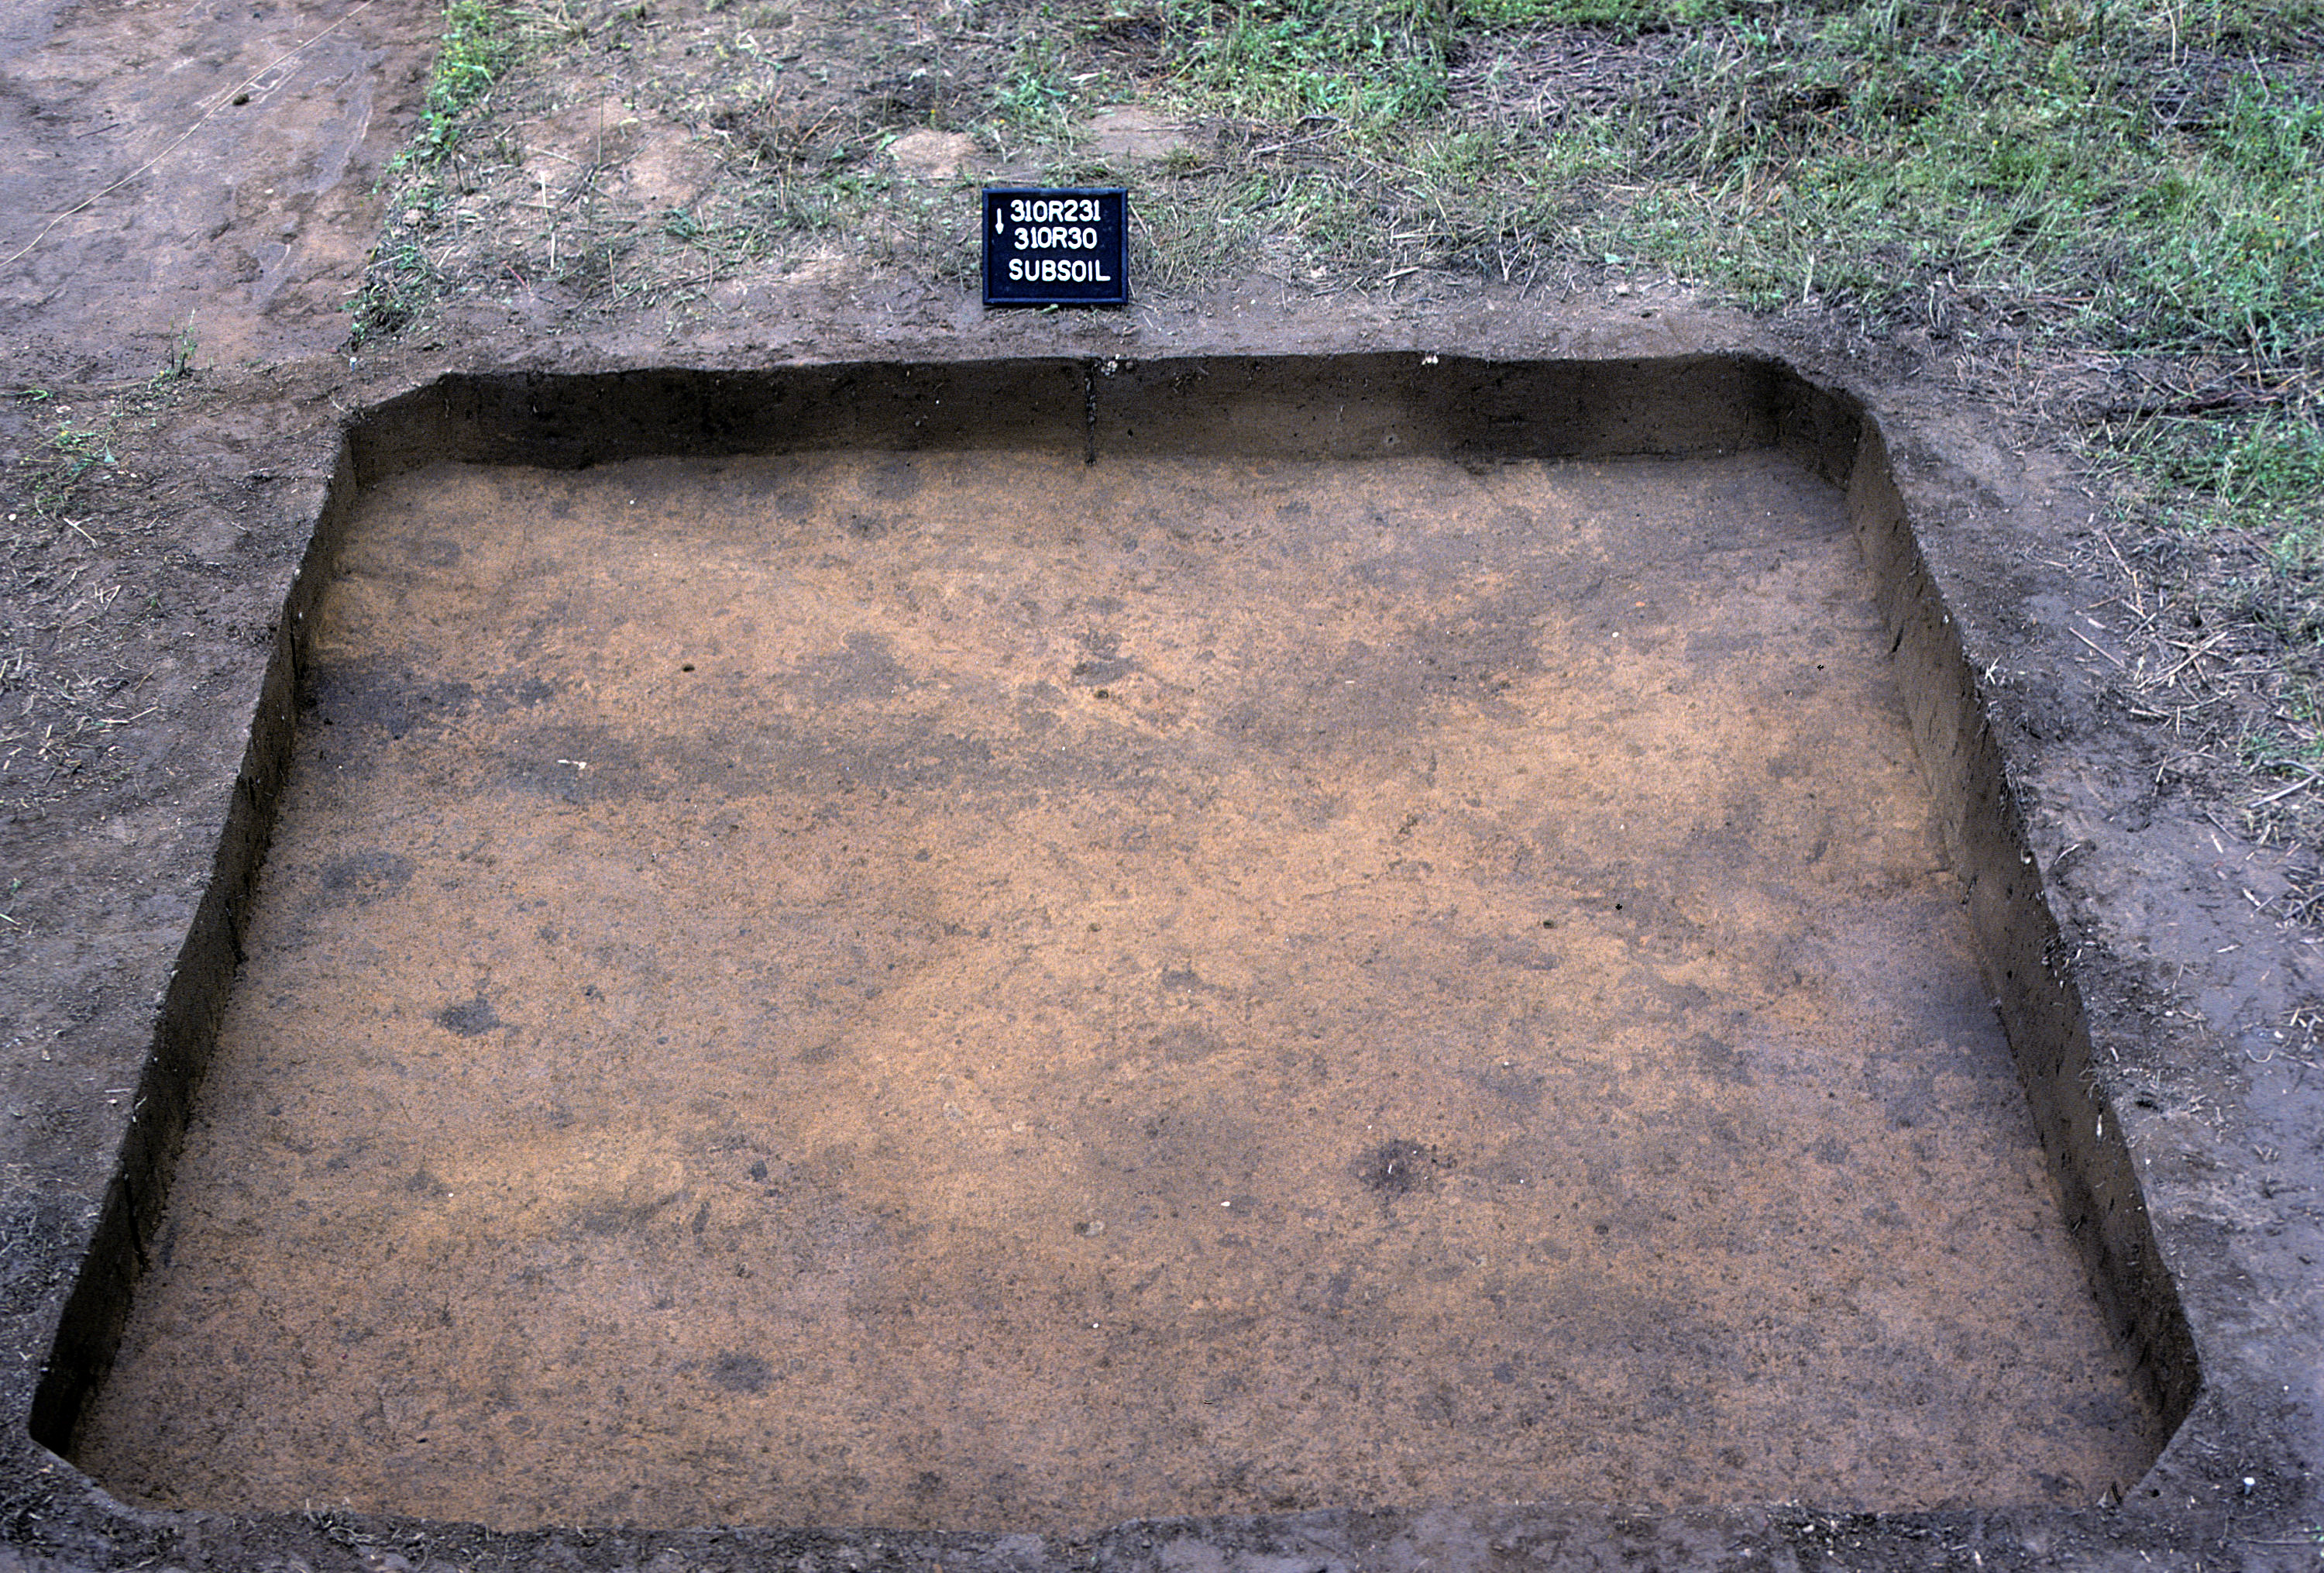 Figure 1015. Sq. 310R30 at top of subsoil (view to south).